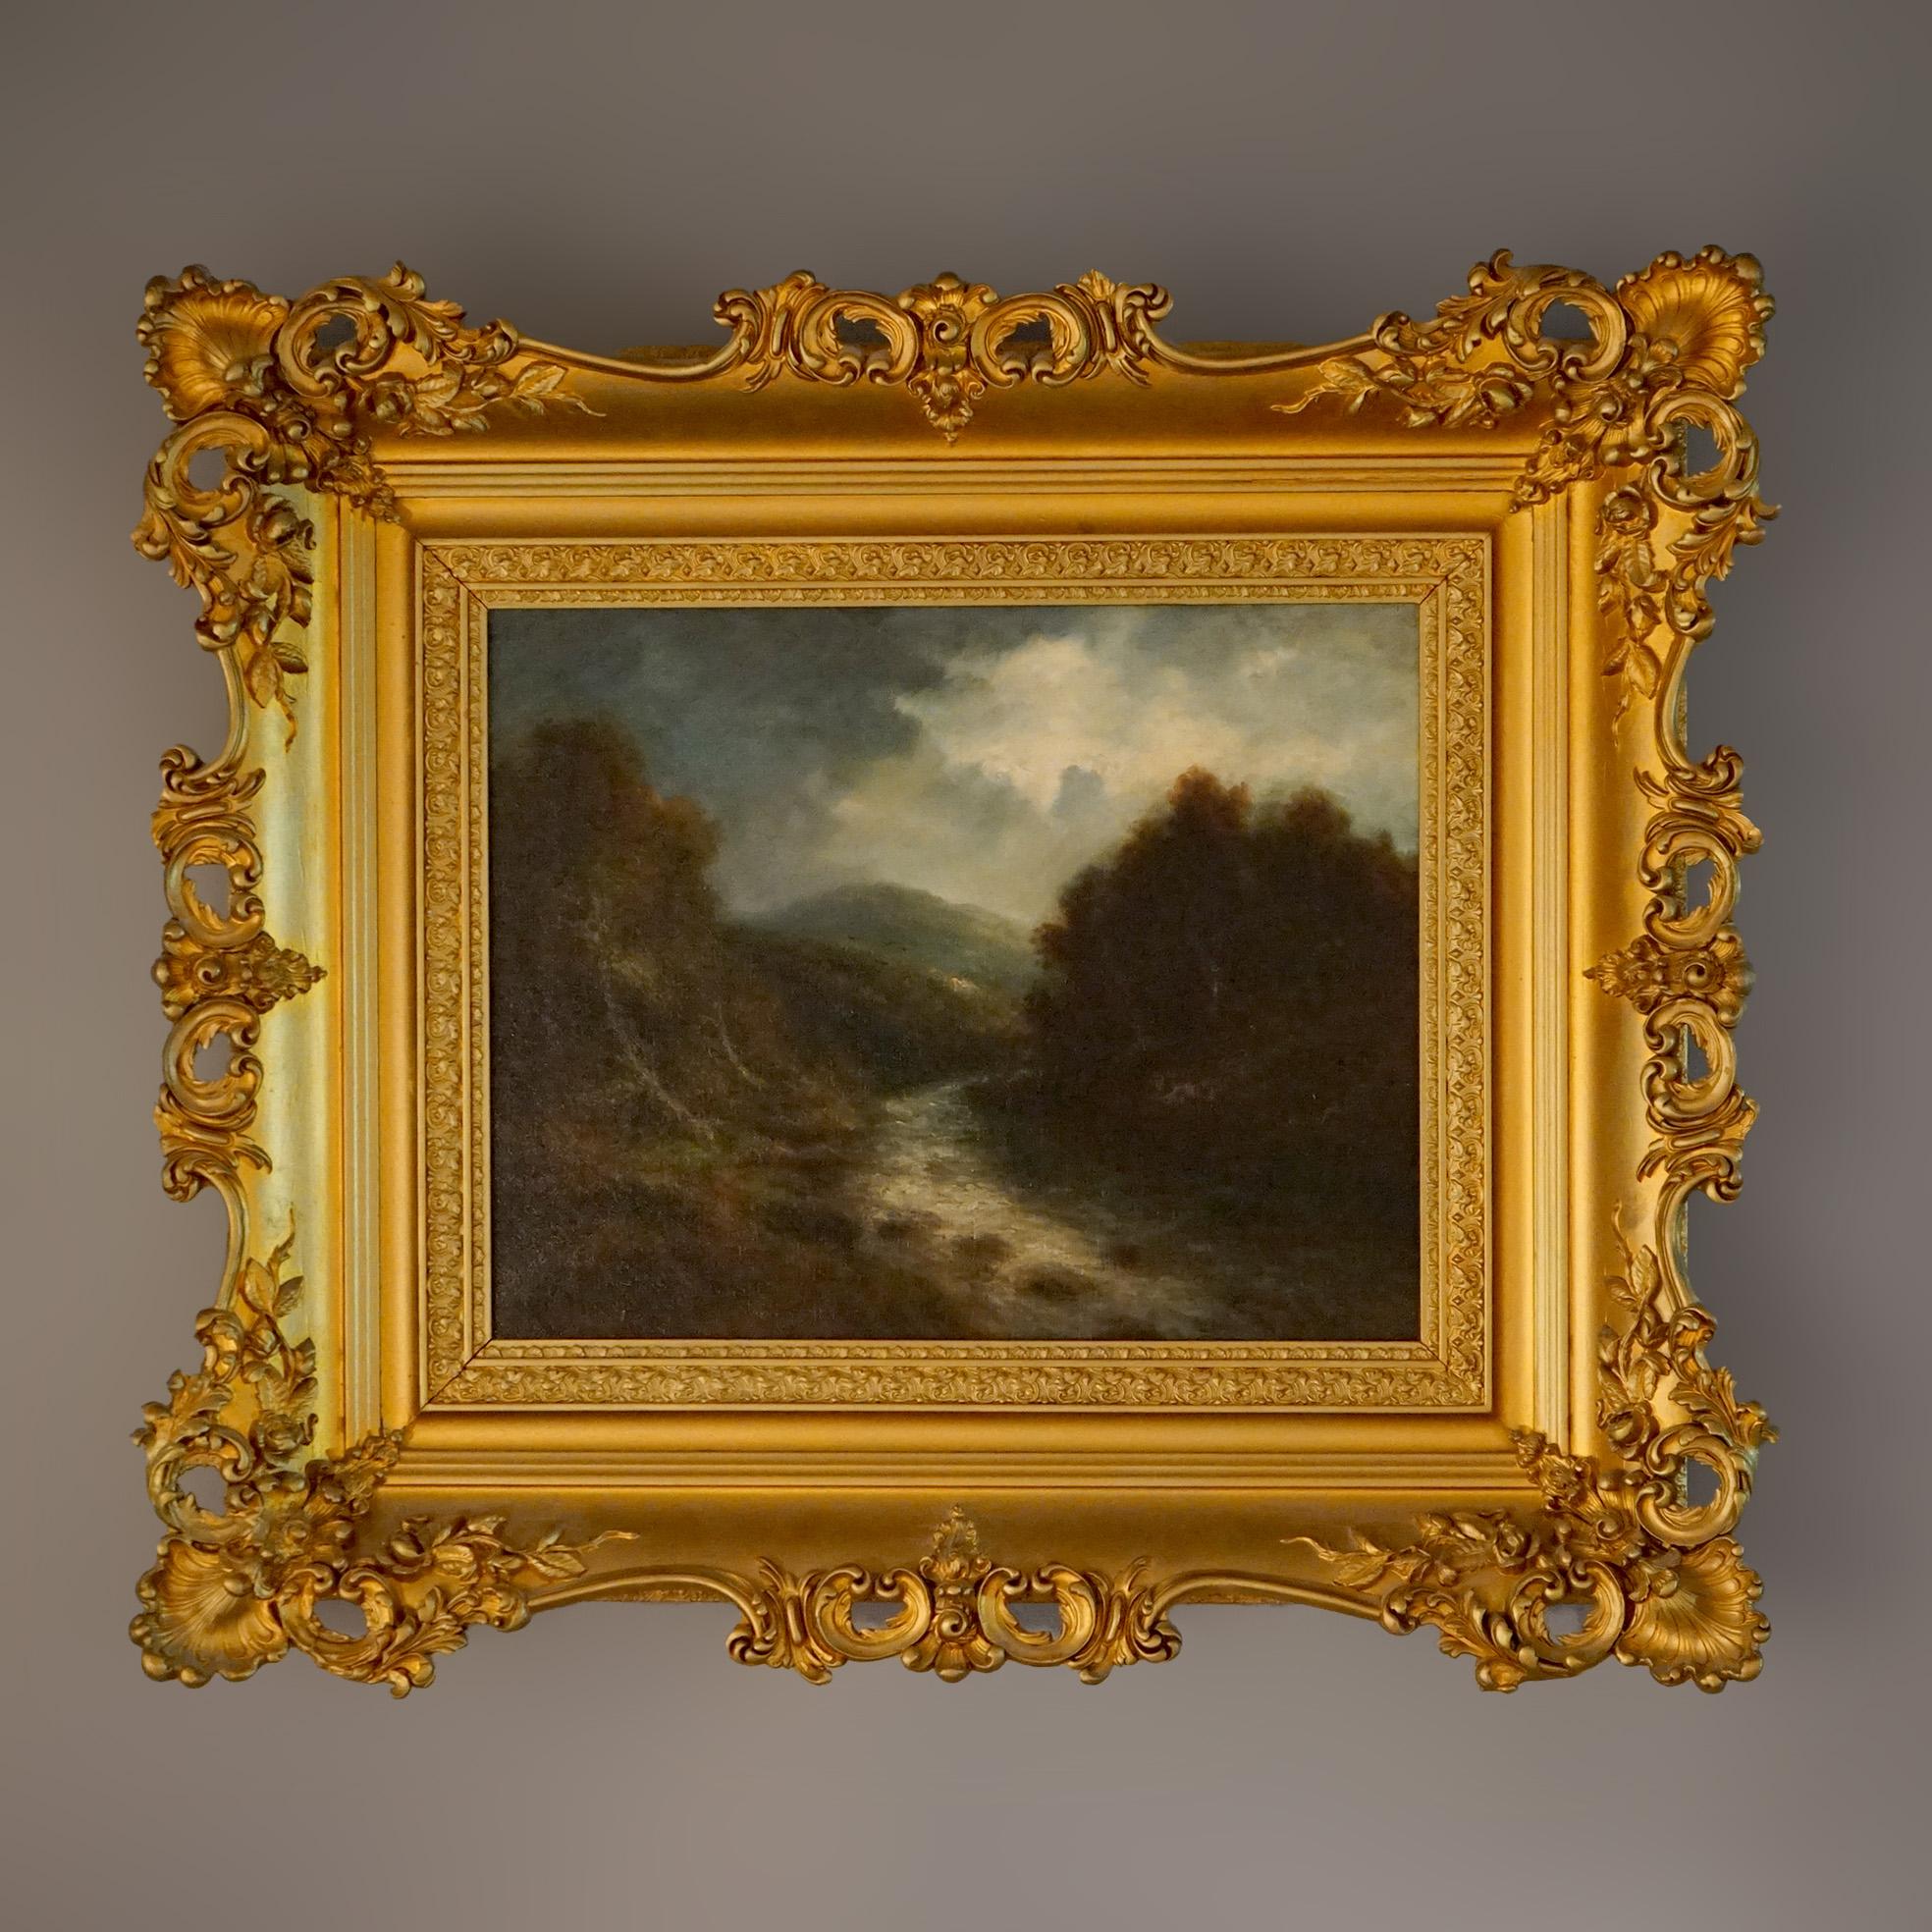 Hand-Painted Antique Painting, Hudson River School Landscape by T.B.Griffin 19thC